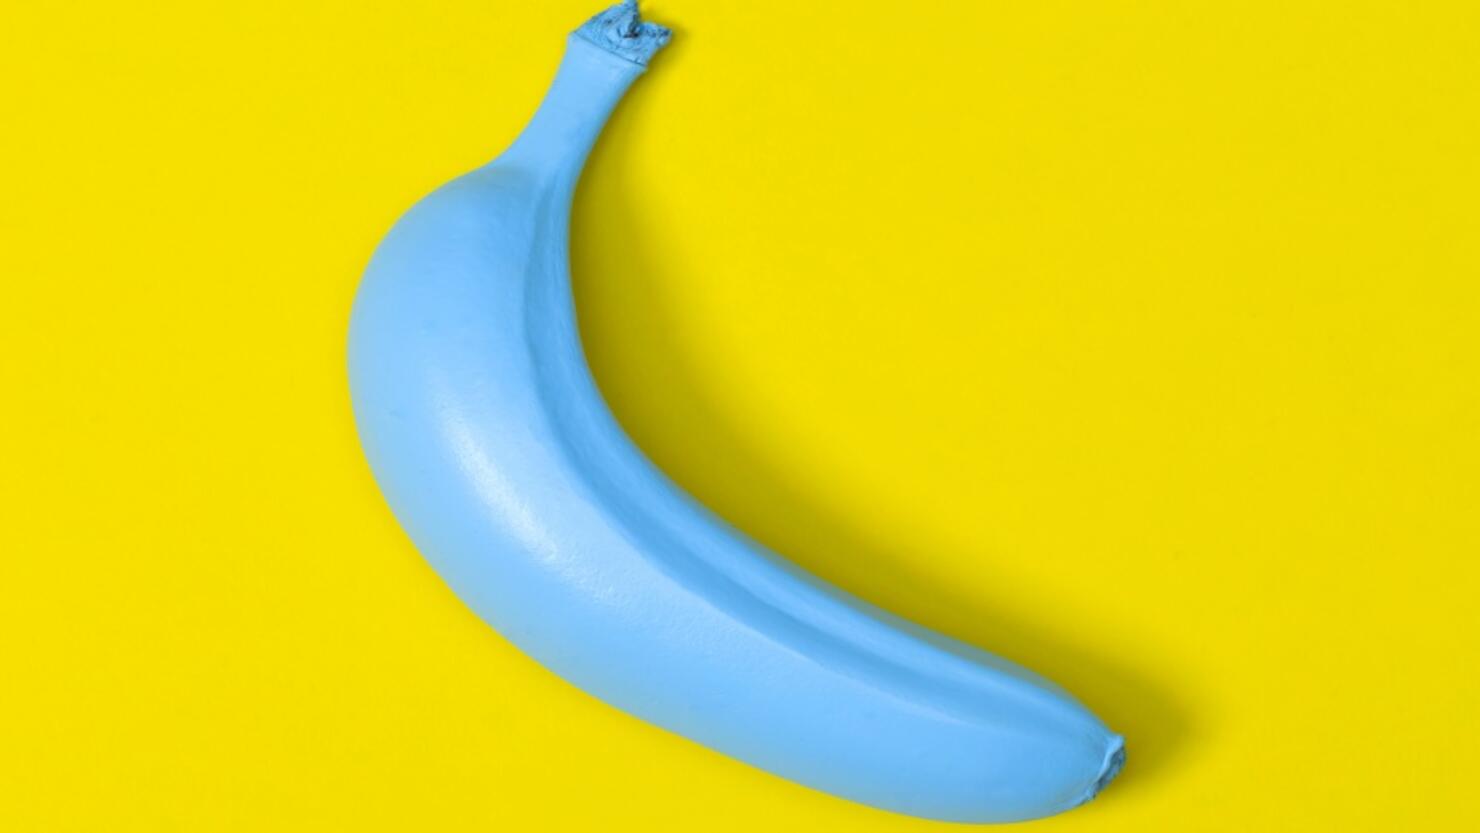 BLUE BANANAS Are Real And You Can Get Them In Arizona